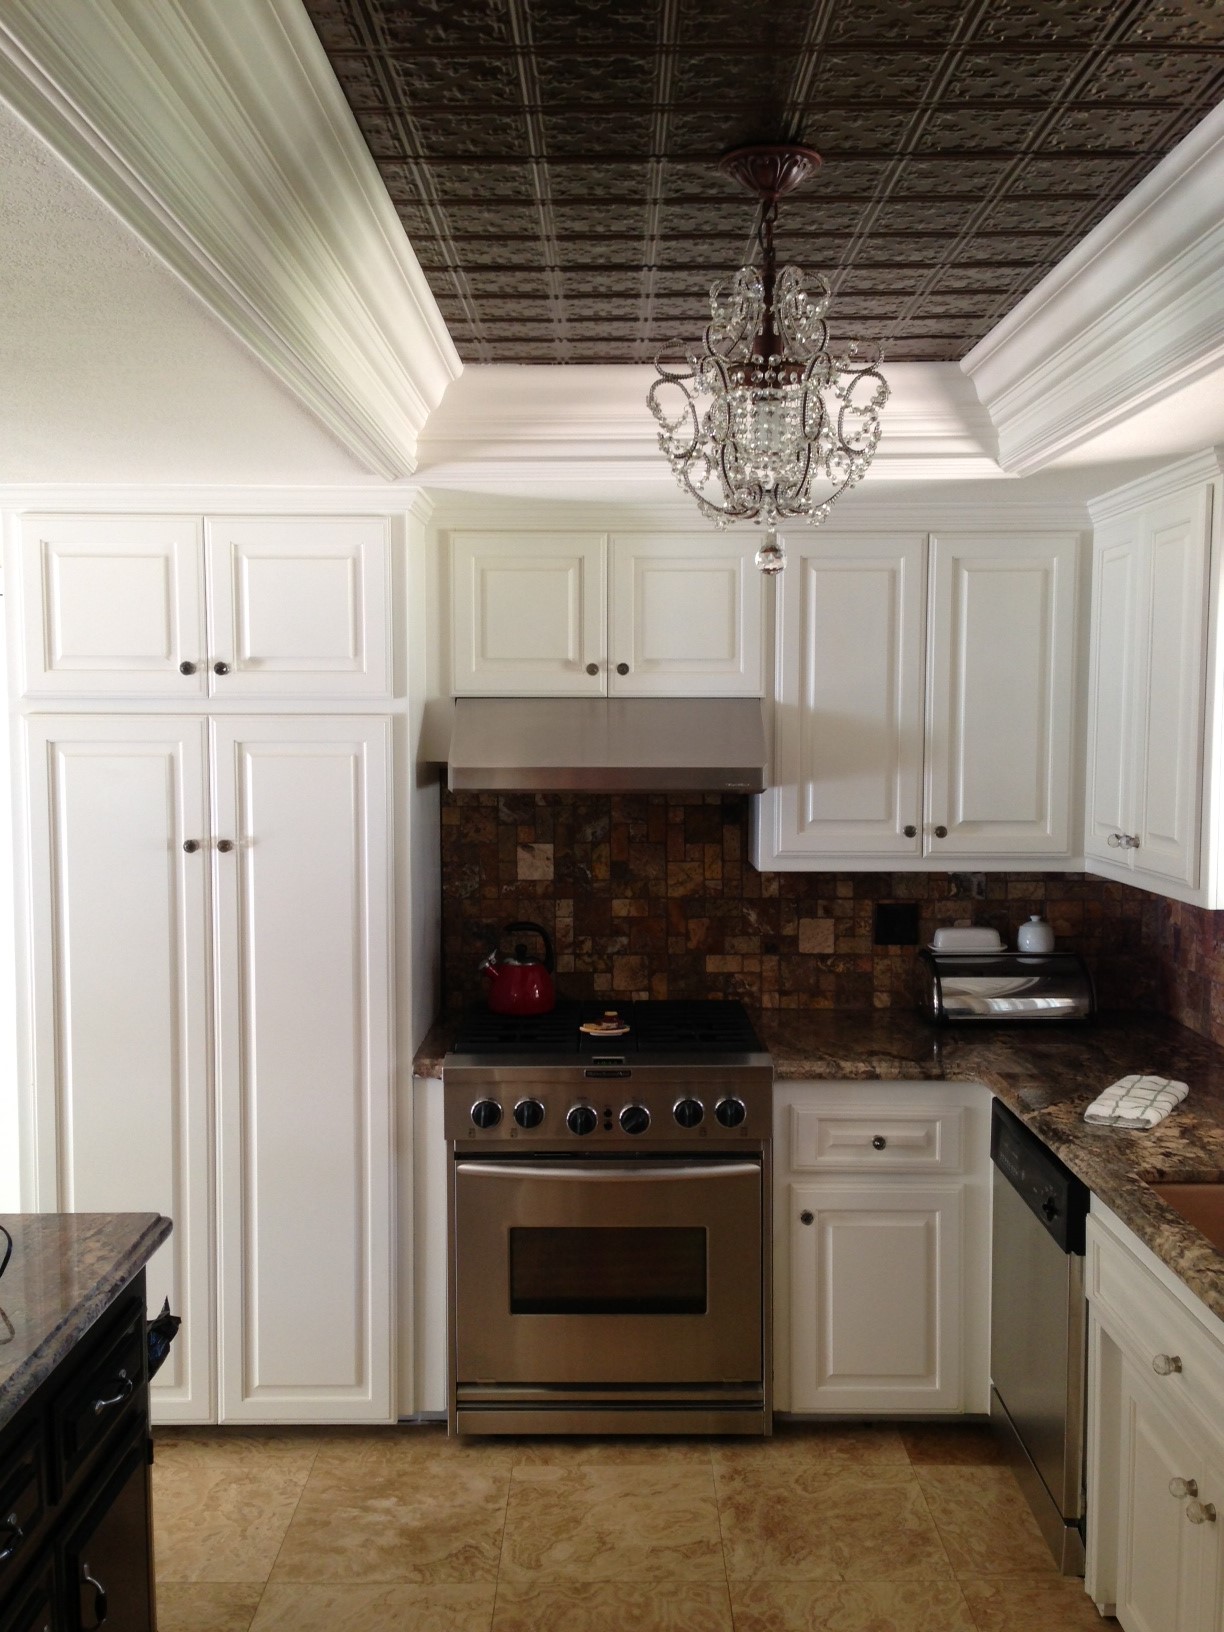 You are currently viewing An Inexpensive Kitchen Cabinet Remodel?